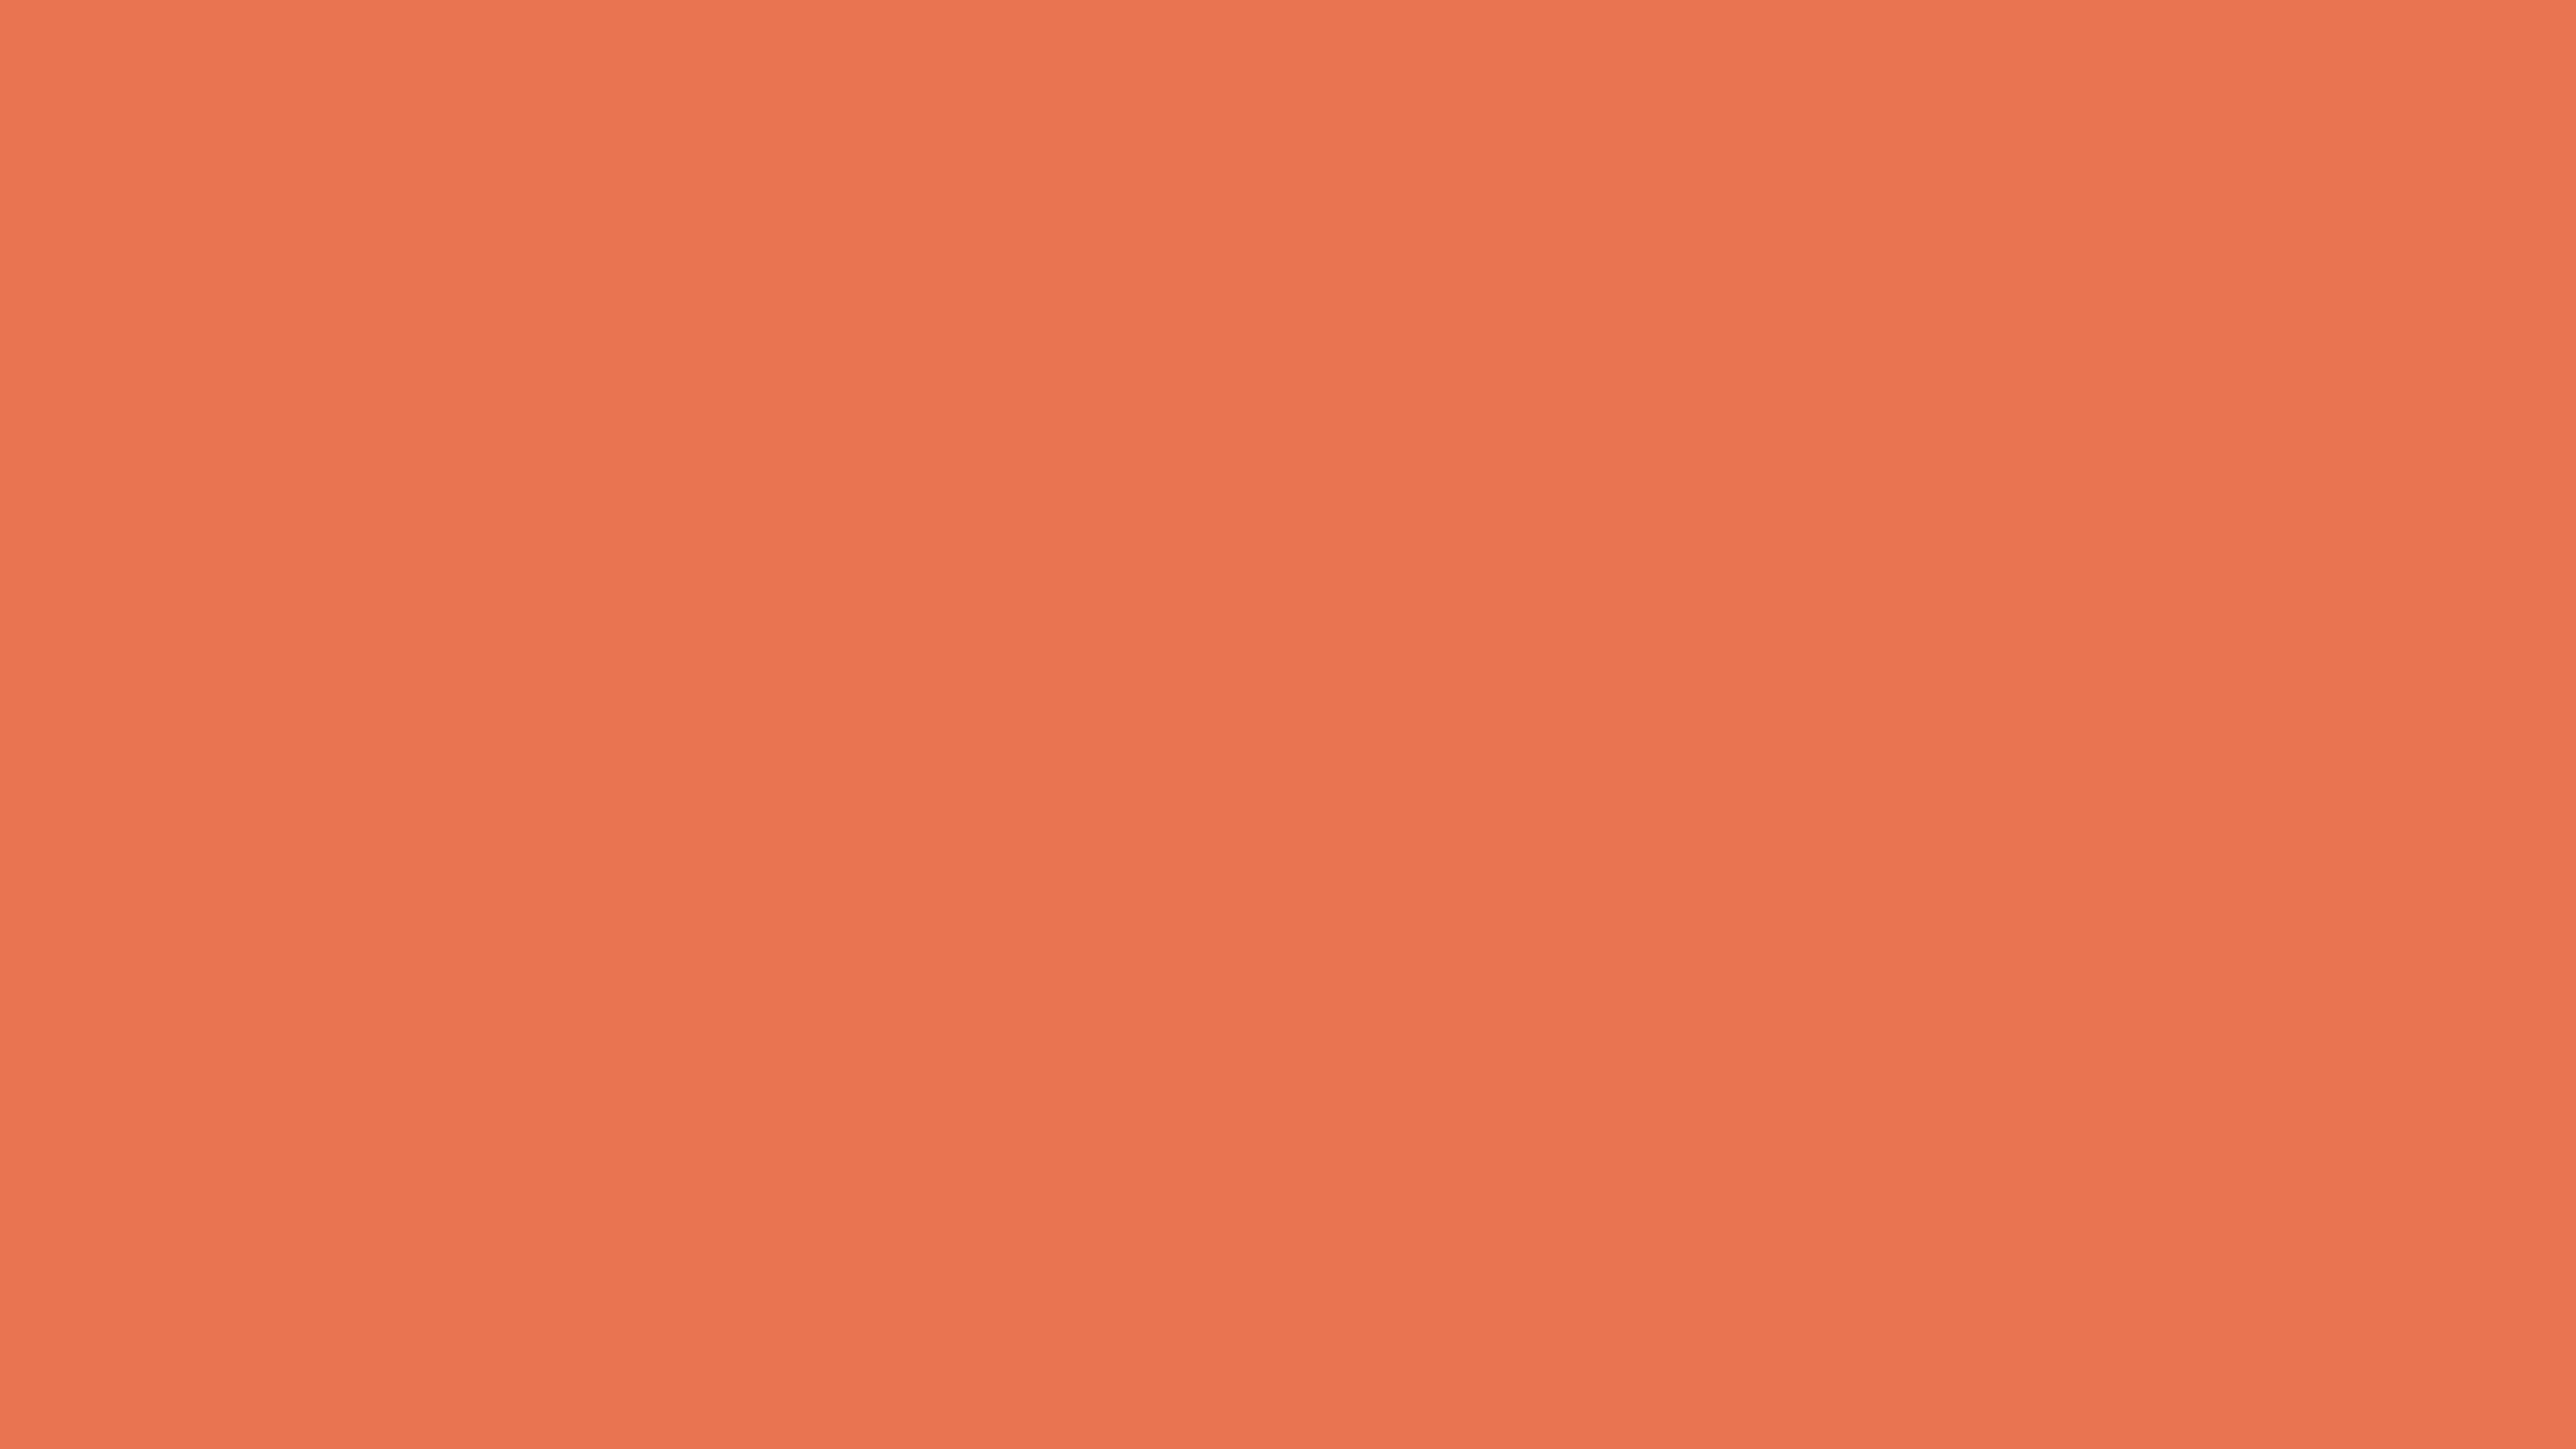 5120x2880 Burnt Sienna Solid Color Background